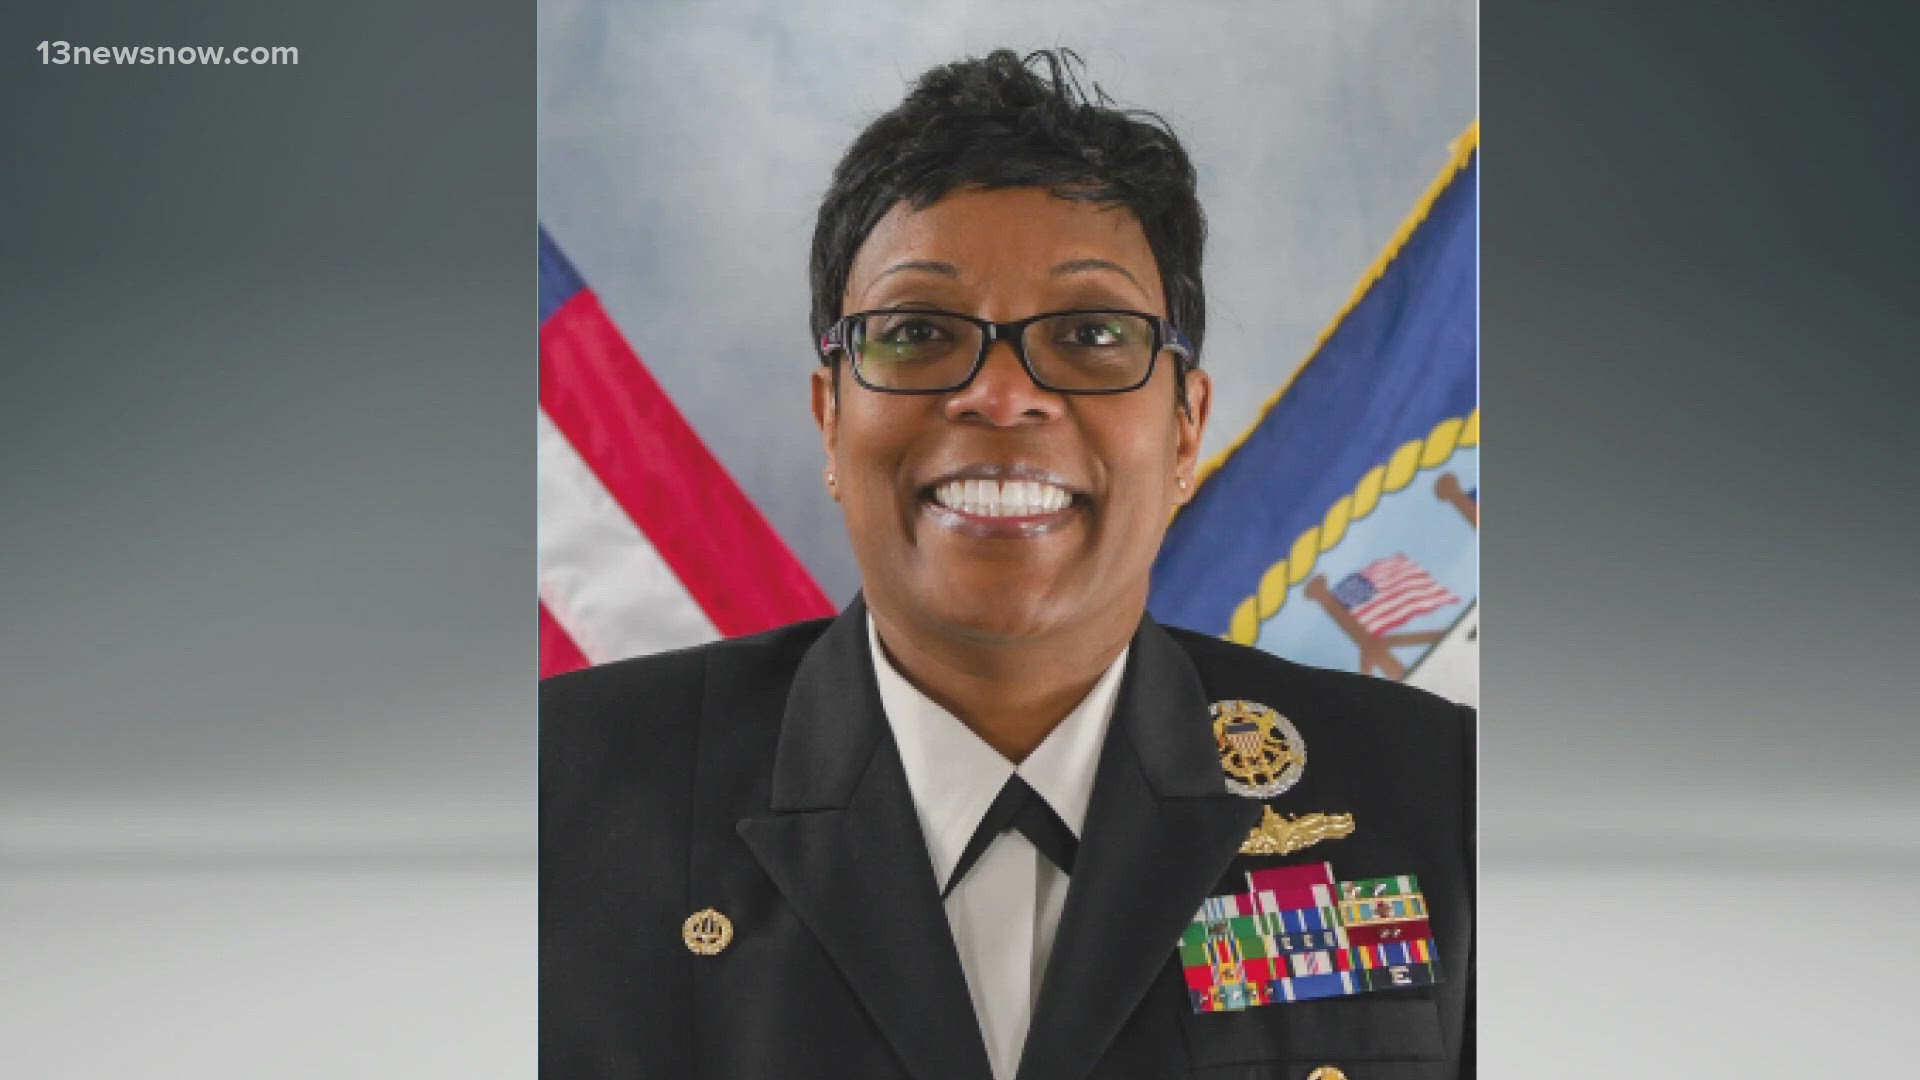 Janet Days is the 1st African American female commanding officer of the world's largest Naval base, Naval Station Norfolk, in the installation's 107-year history.